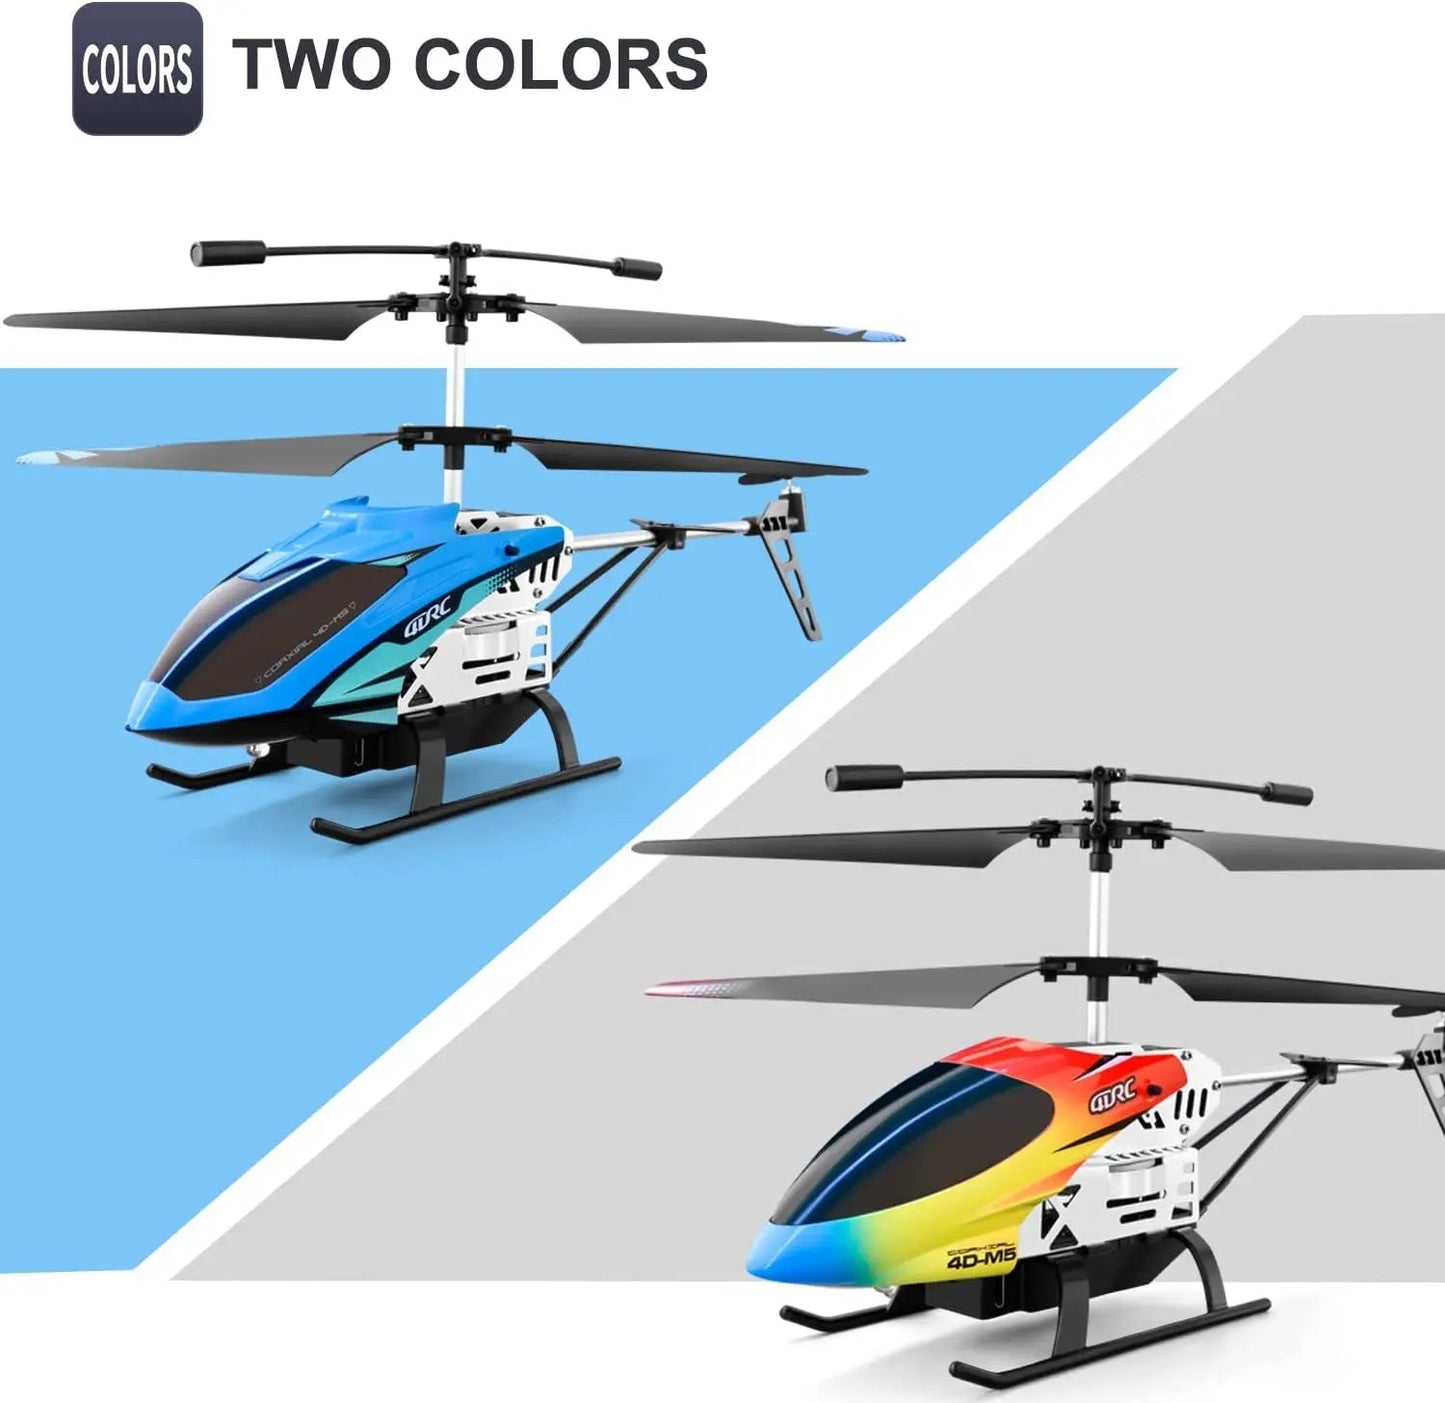 M5 Remote Control Helicopter Altitude Hold 3.5 Channel Rc Helicopters - ToylandEU